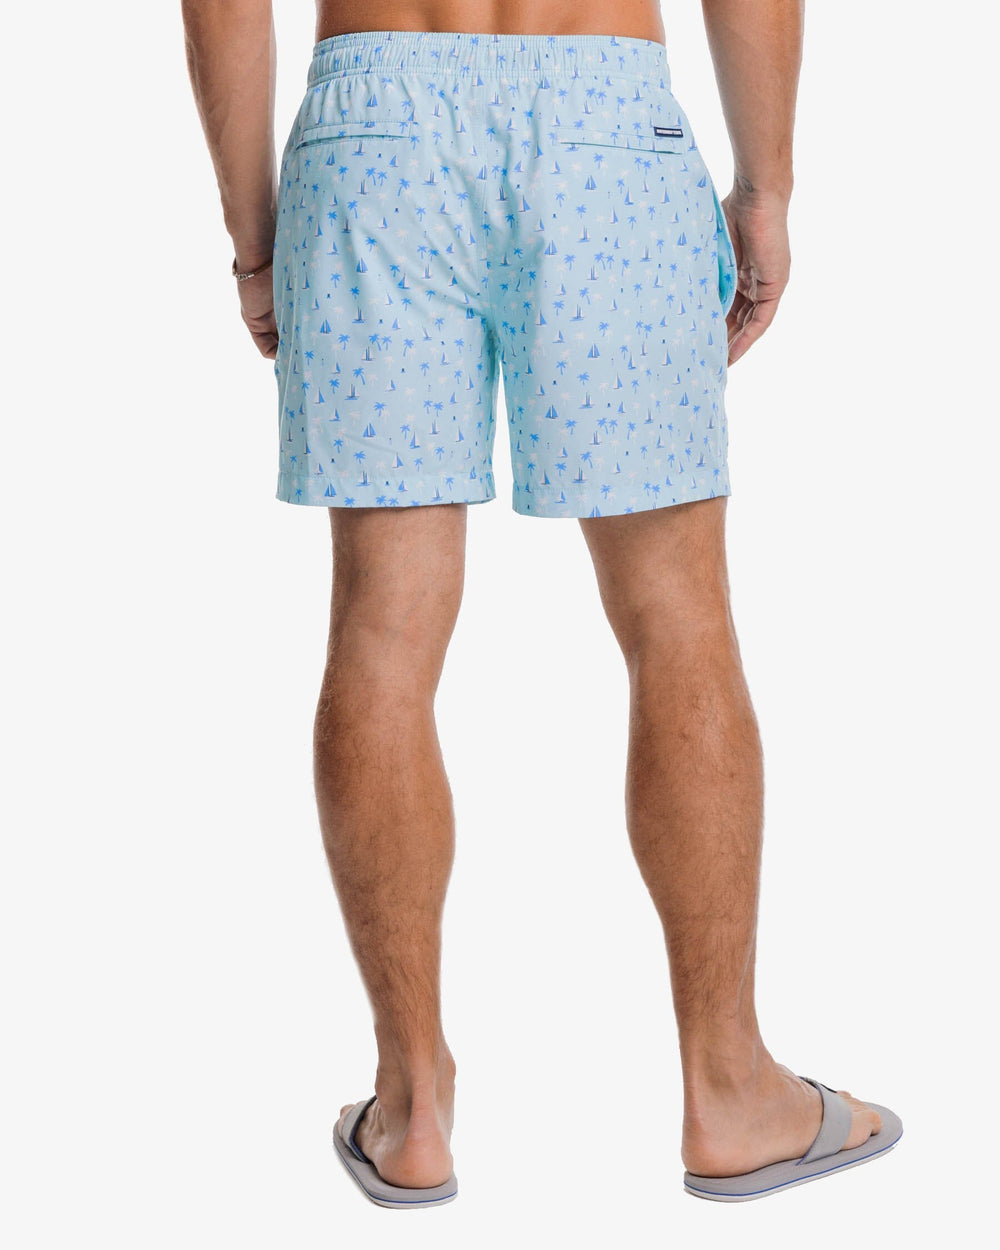 The back view of the Southern Tide Seascape Sailing Printed Swim Trunk by Southern Tide - Baltic Teal